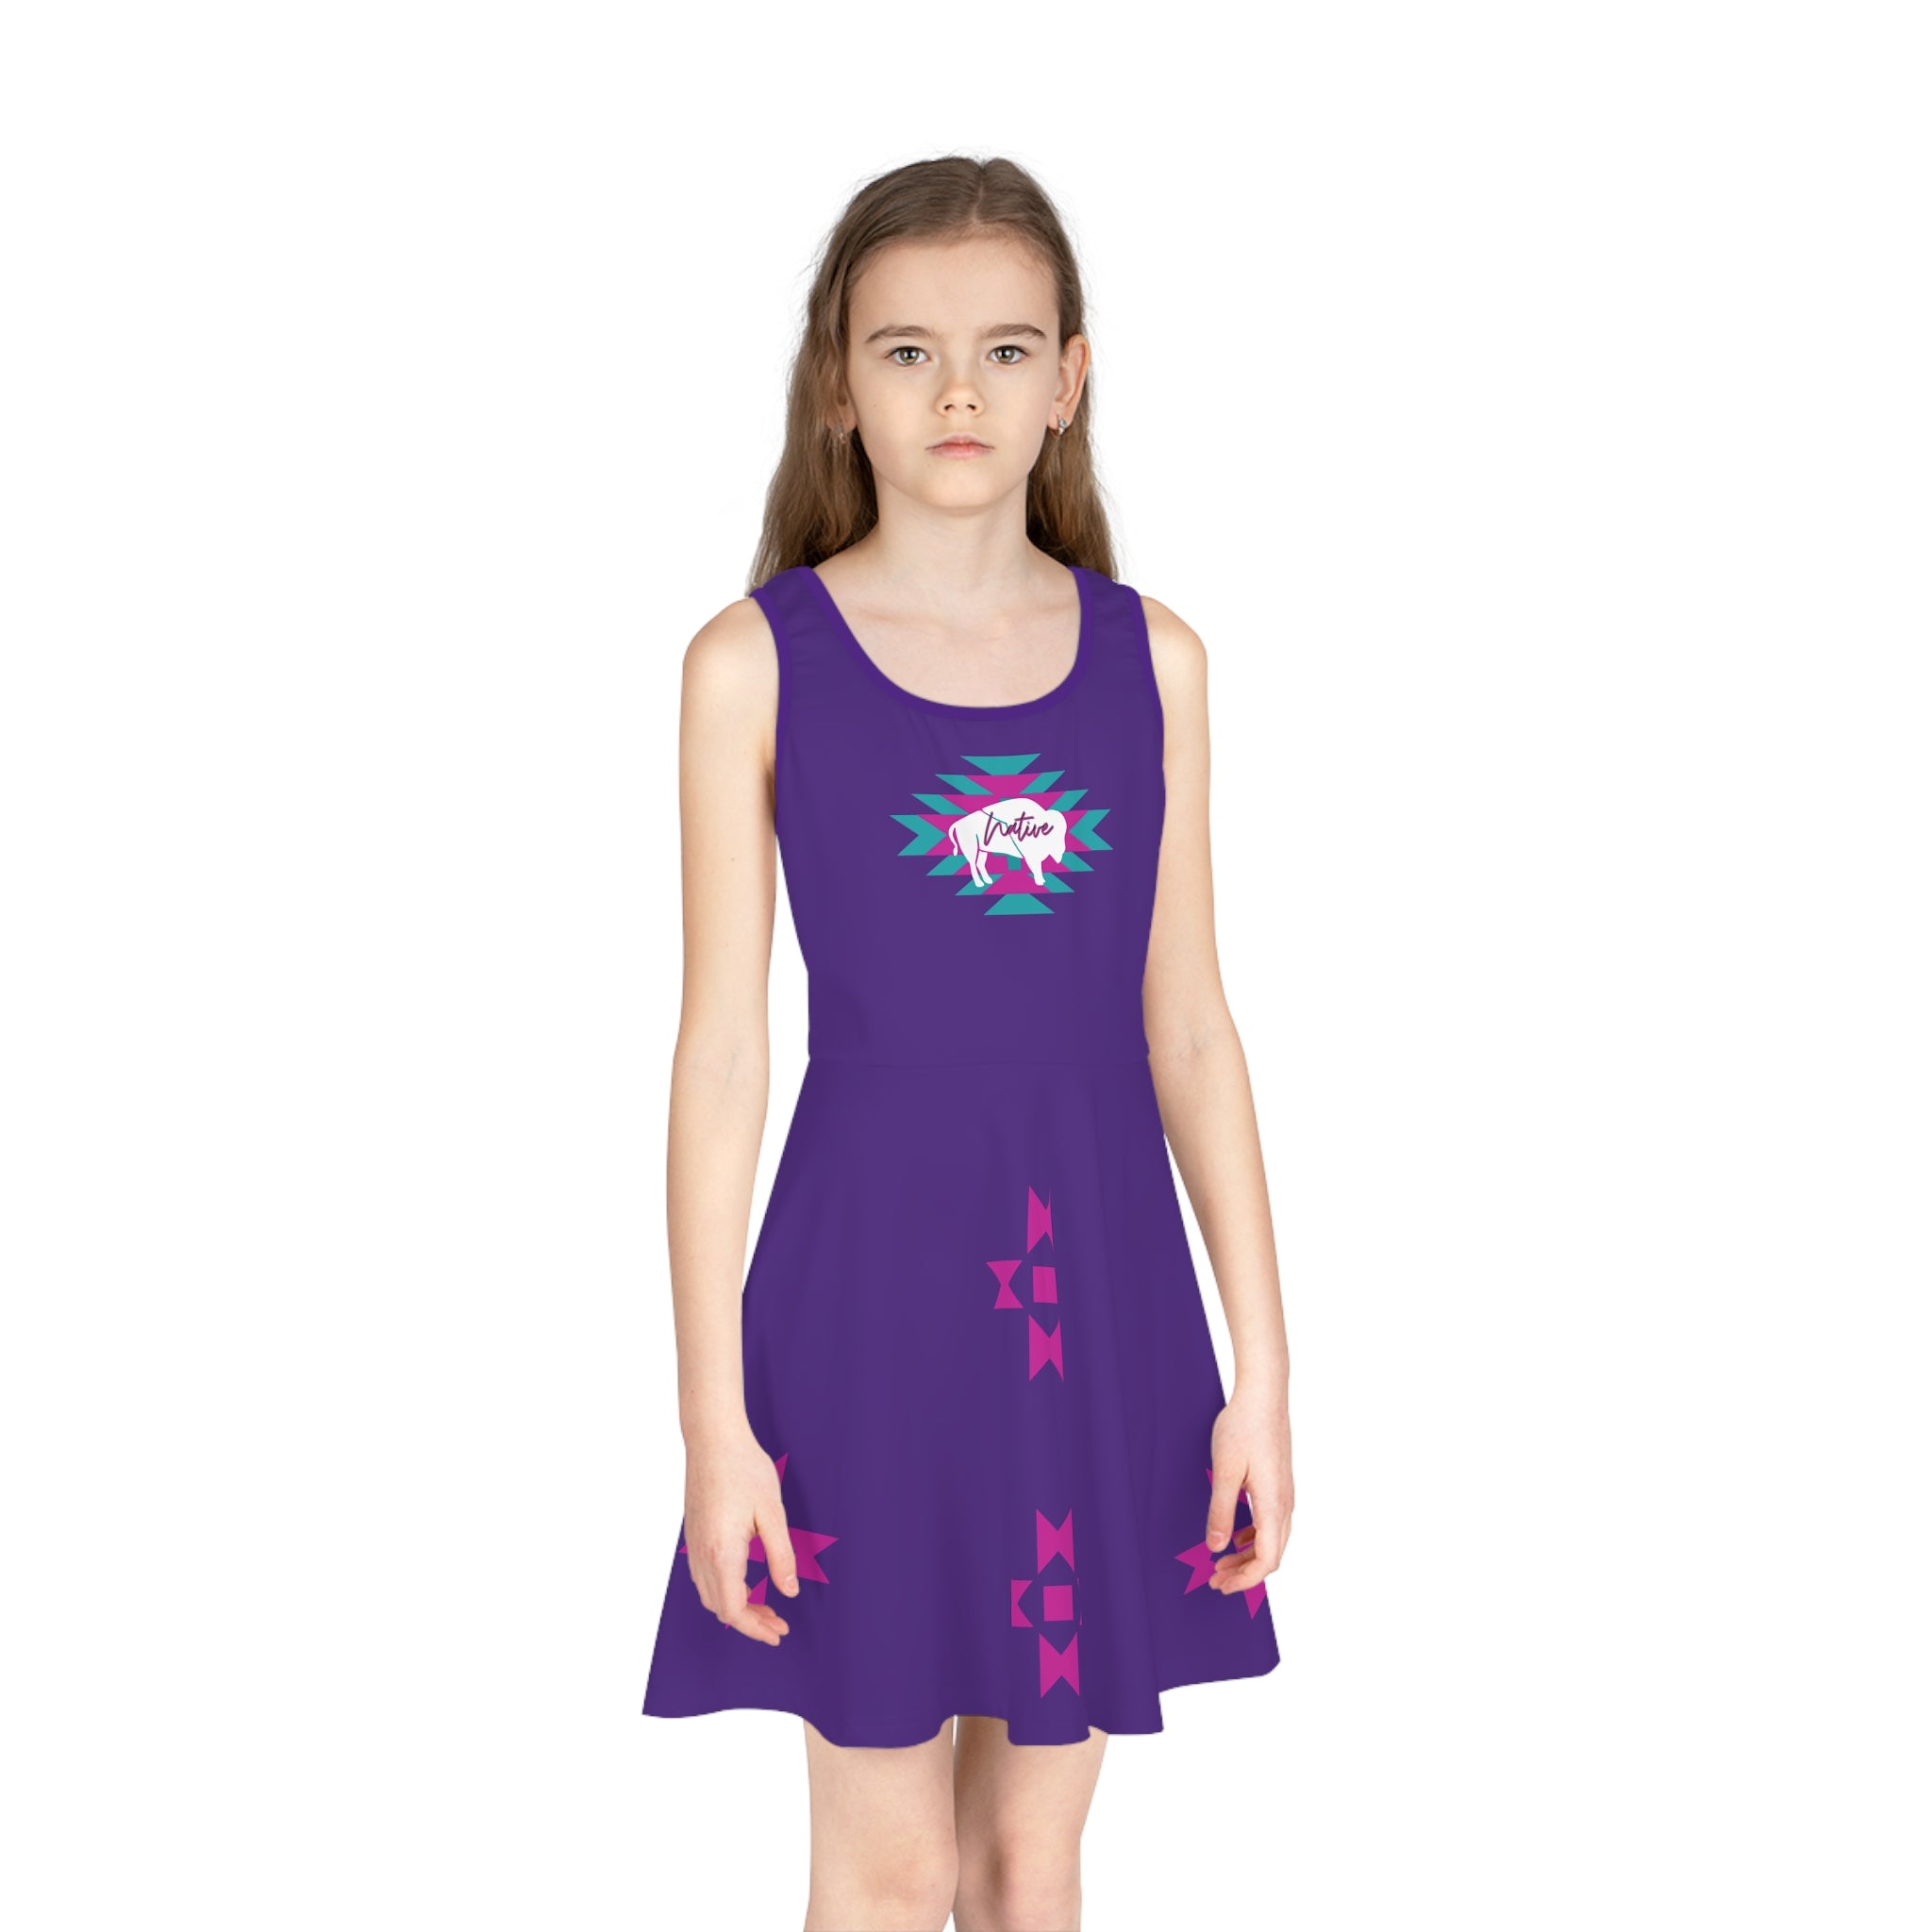 White Bison on Pink and Teal Native Pattern Girls' Sleeveless Sundress